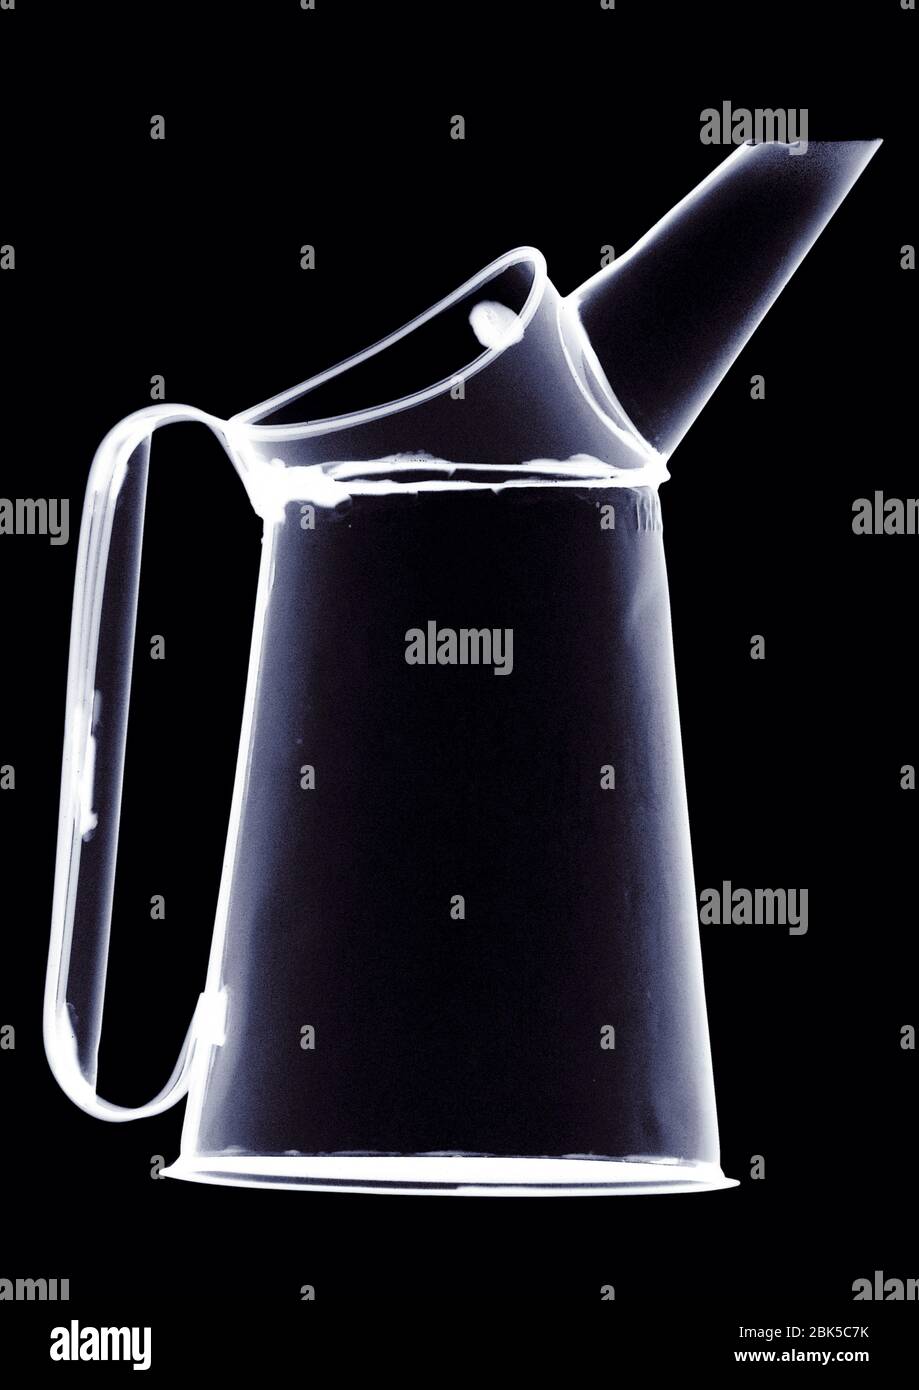 Container with spout, X-ray. Stock Photo